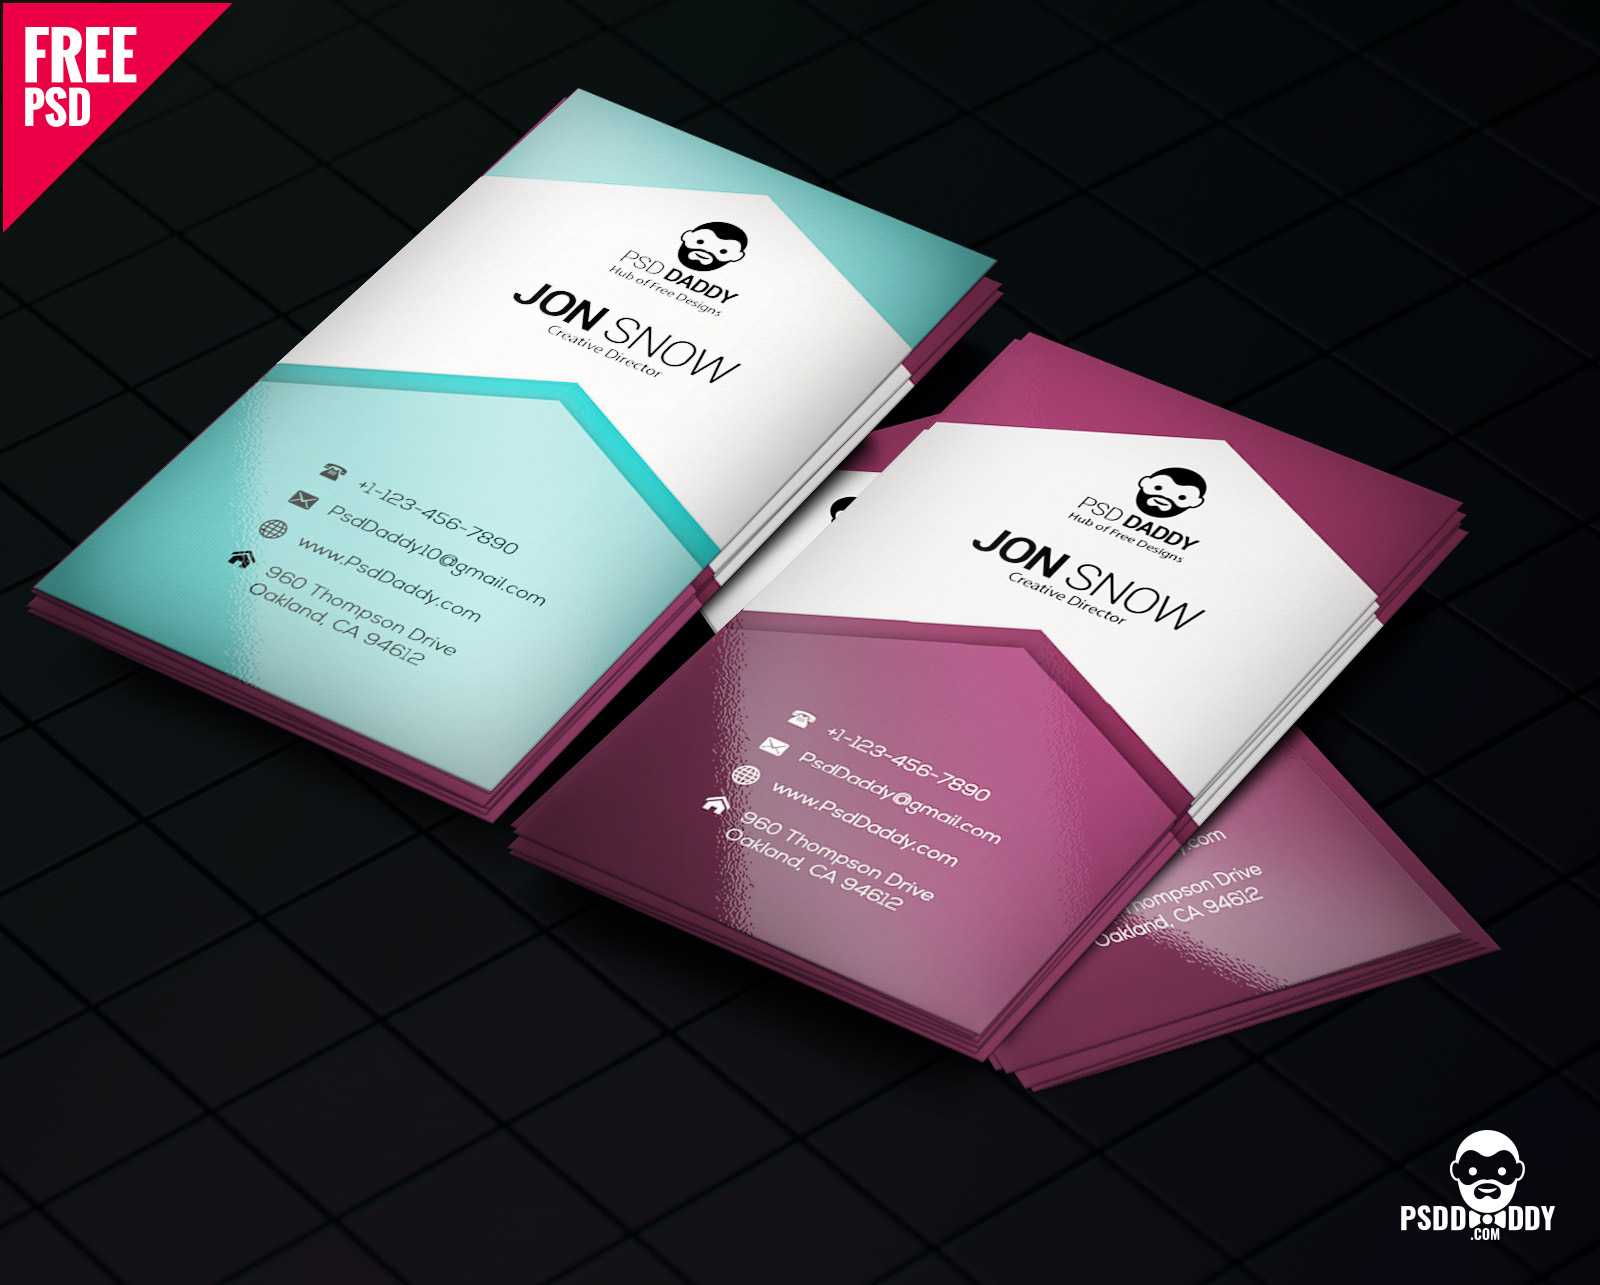 Download]Creative Business Card Psd Free | Psddaddy With Regard To Free Psd Visiting Card Templates Download